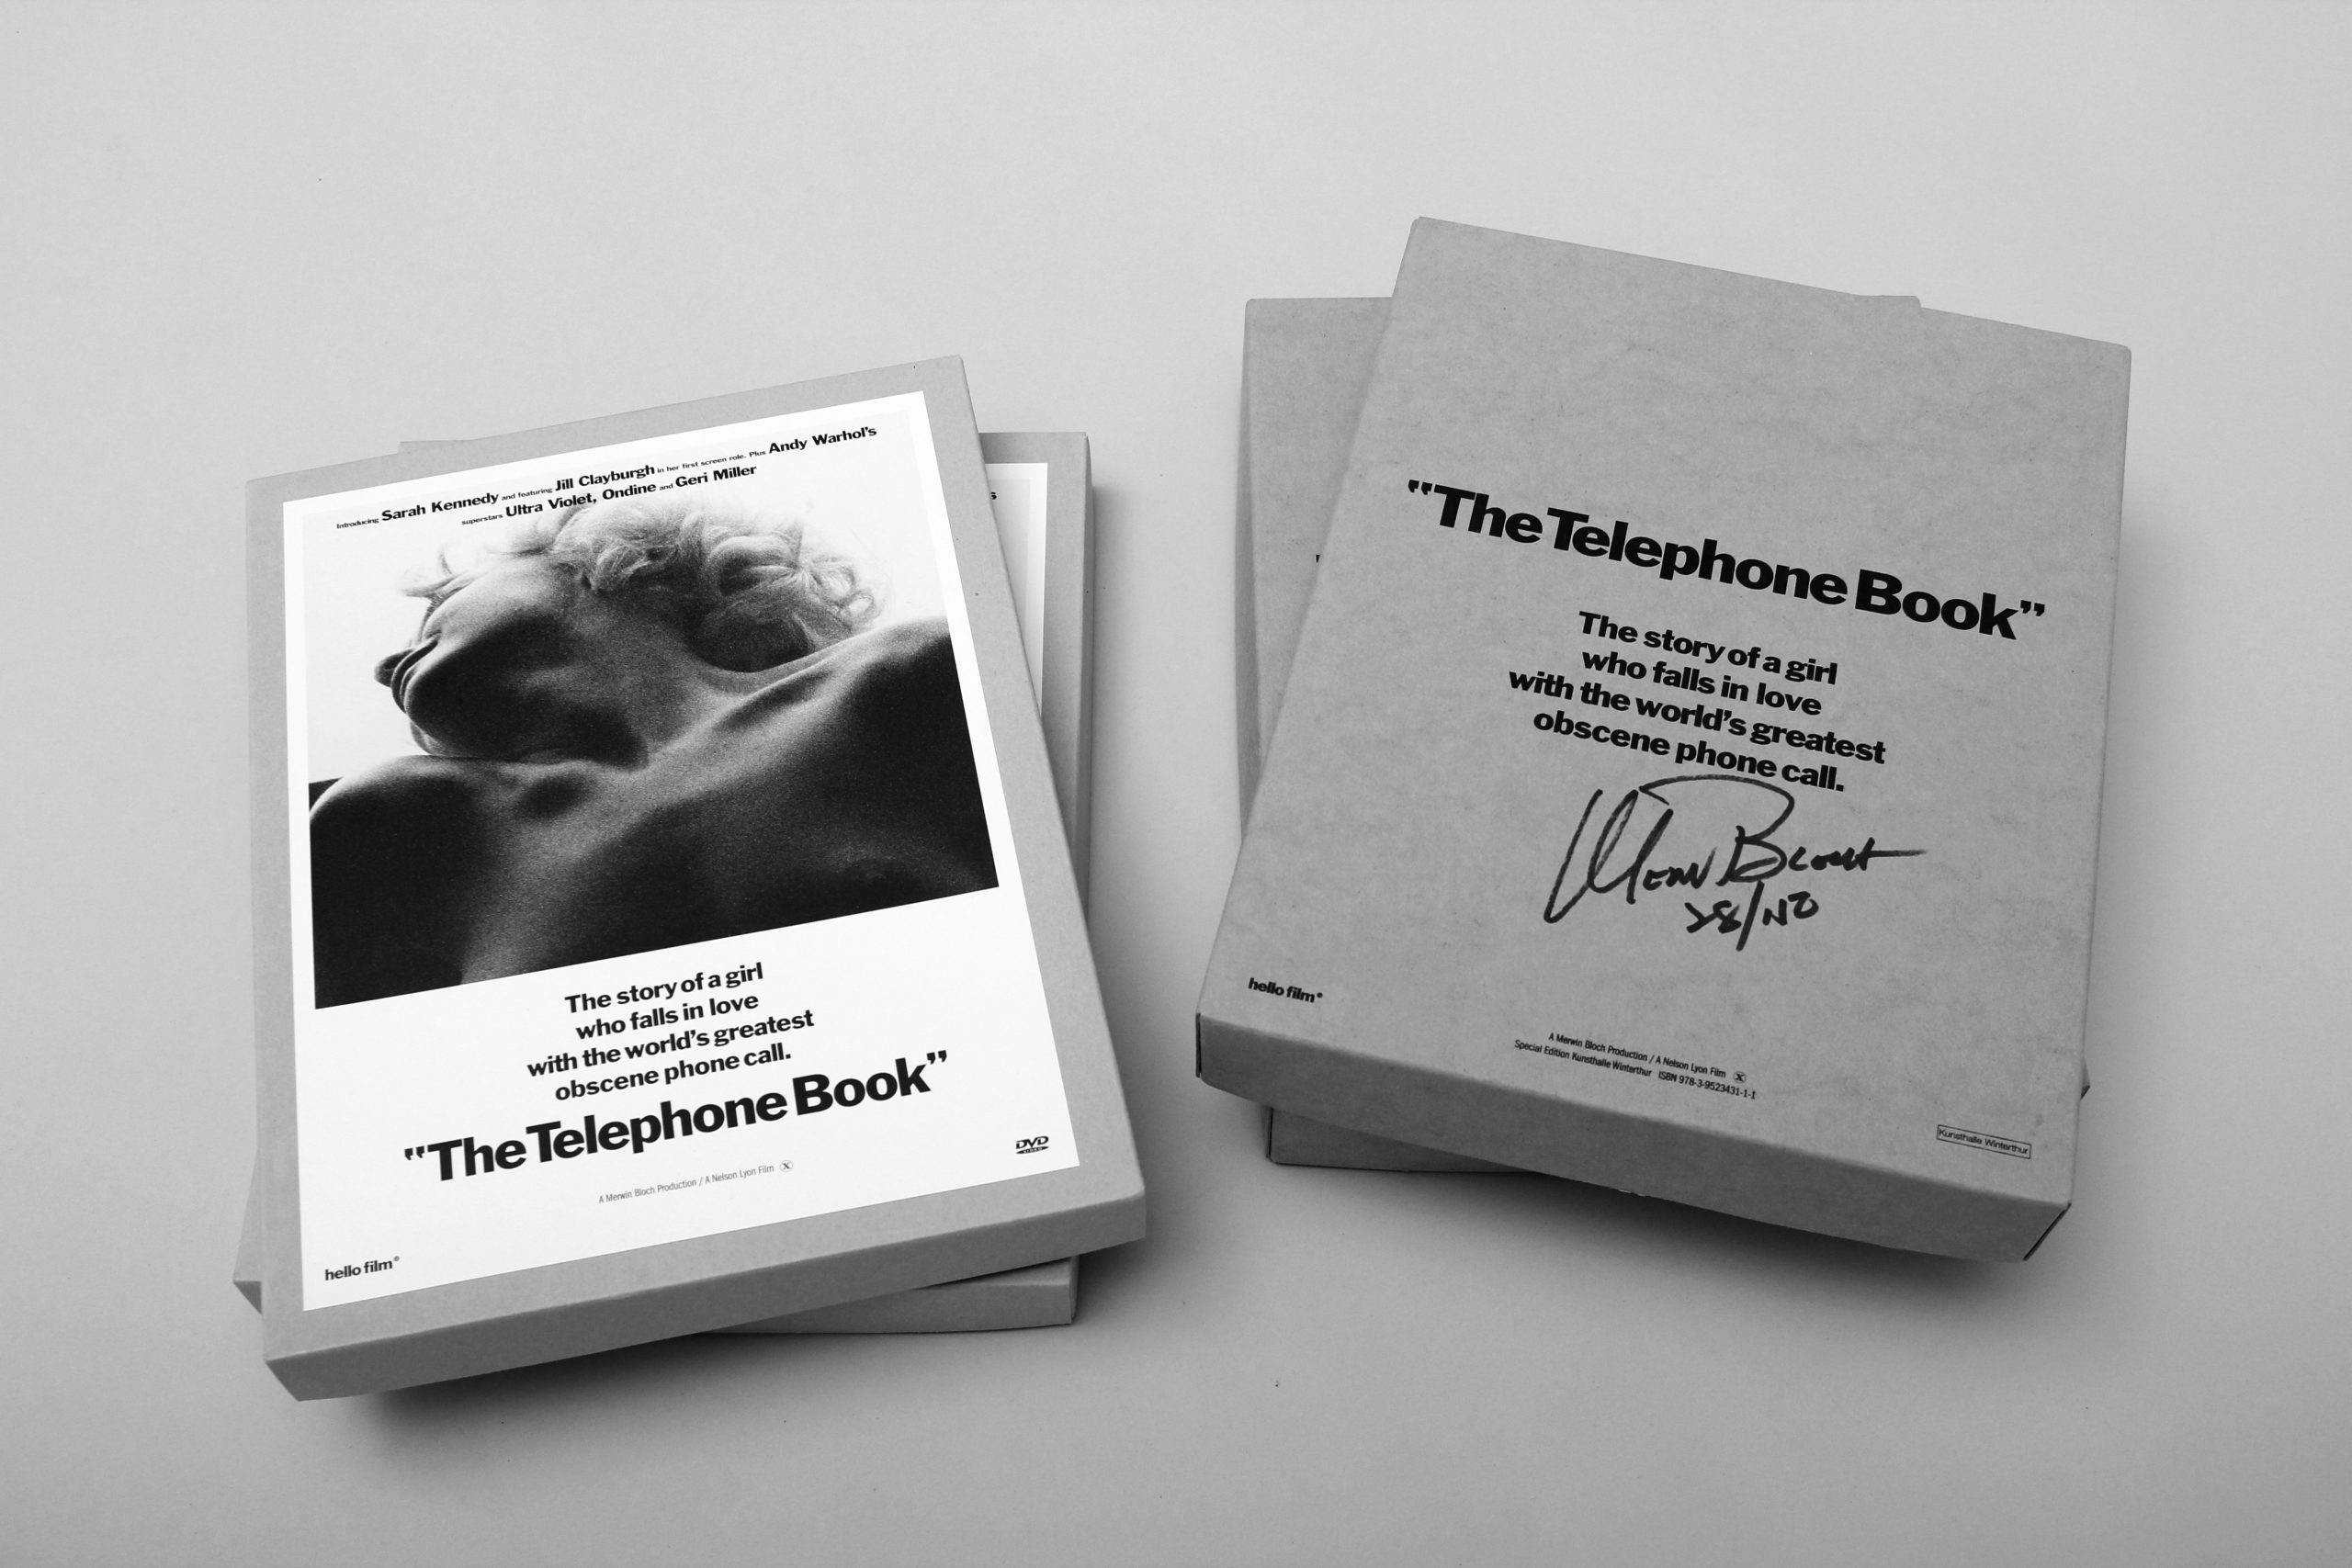 DVD_&_Signed_Box_The_Telephone_book_026. . . . . . . . . . . . . . . . . . . . .2009-026